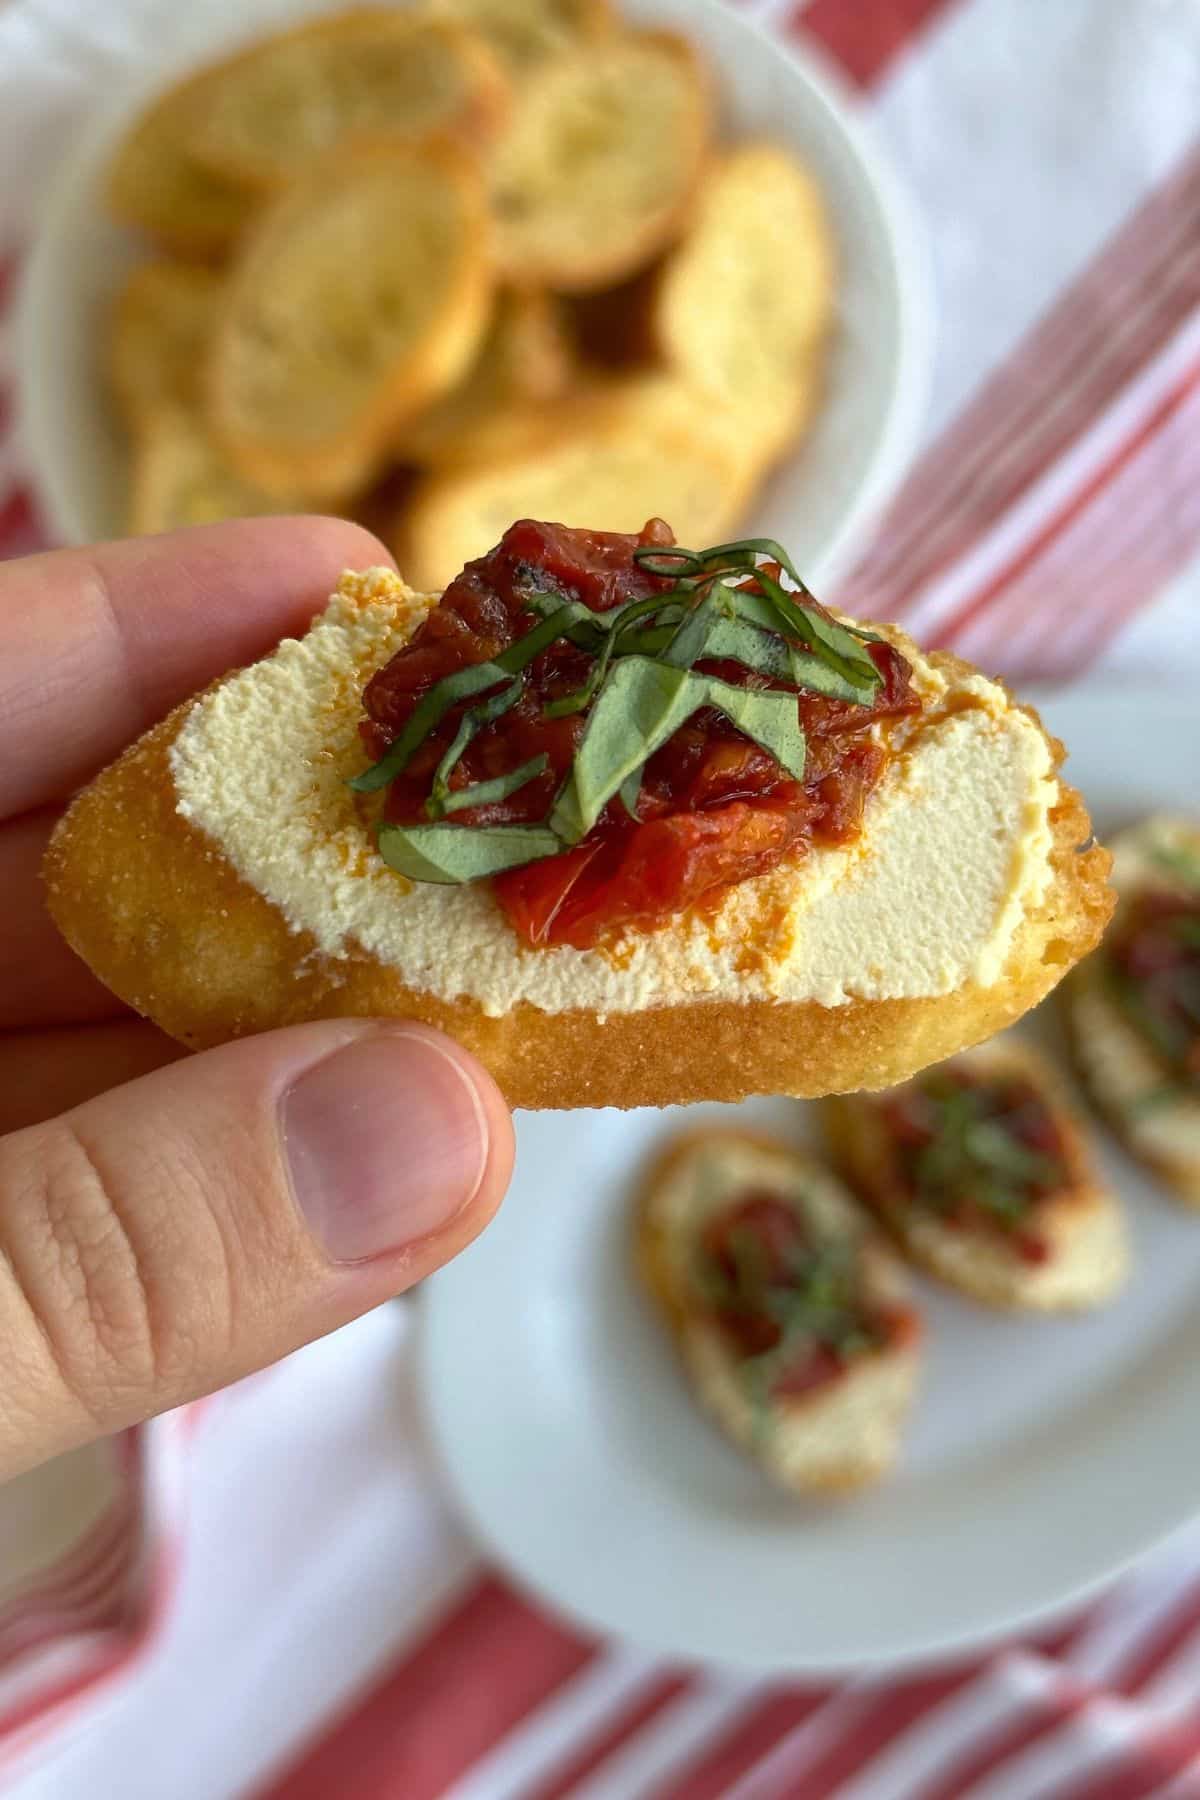 Crostini with tofu ricotta, tomato, and basil topping. In the background are more crostini appetizers.